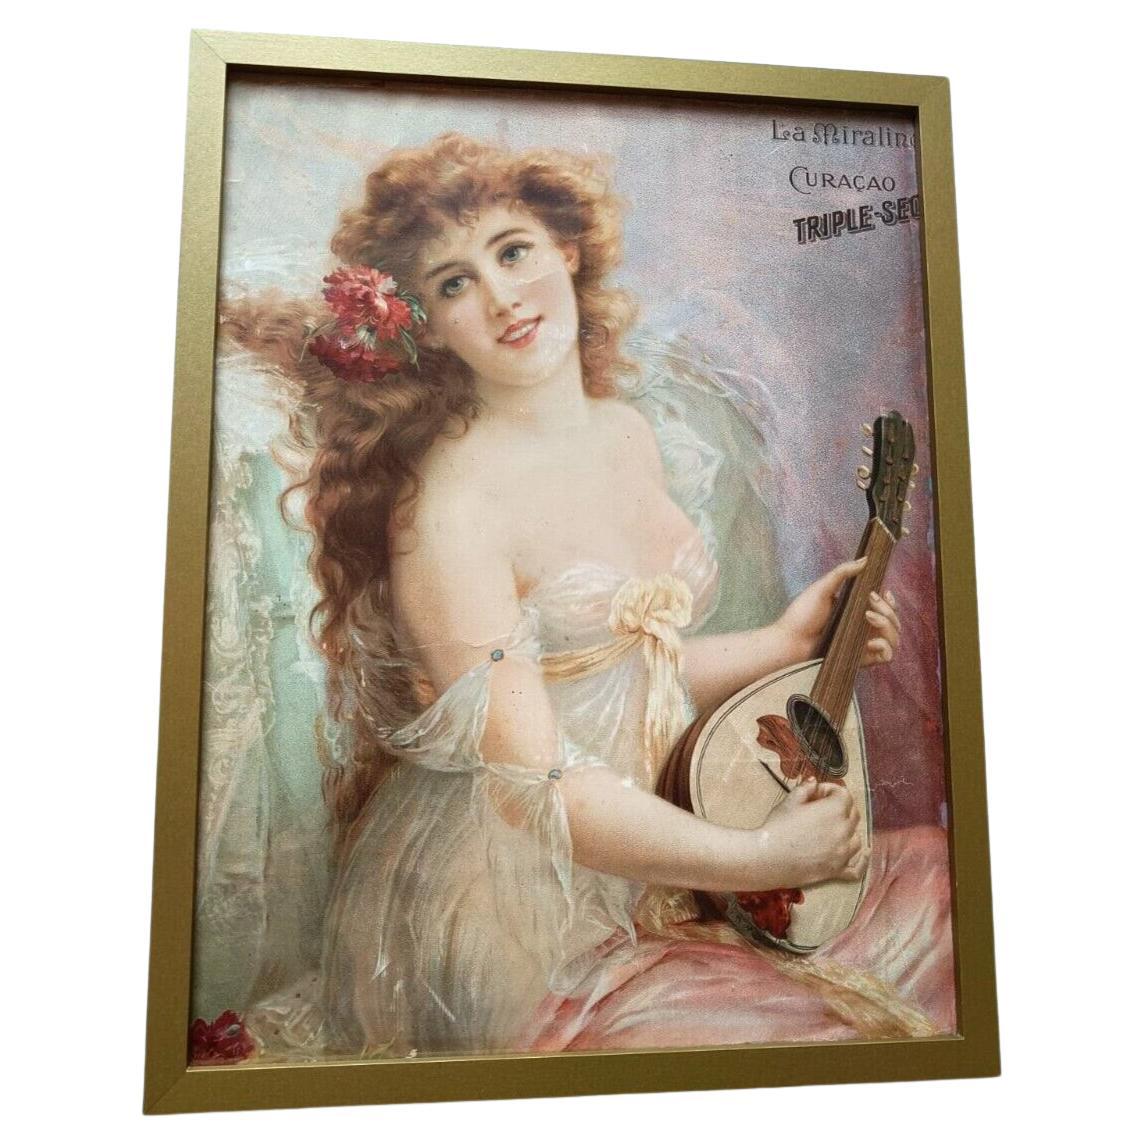 Antique Original French advertising poster Curacao Mirabelle For Sale